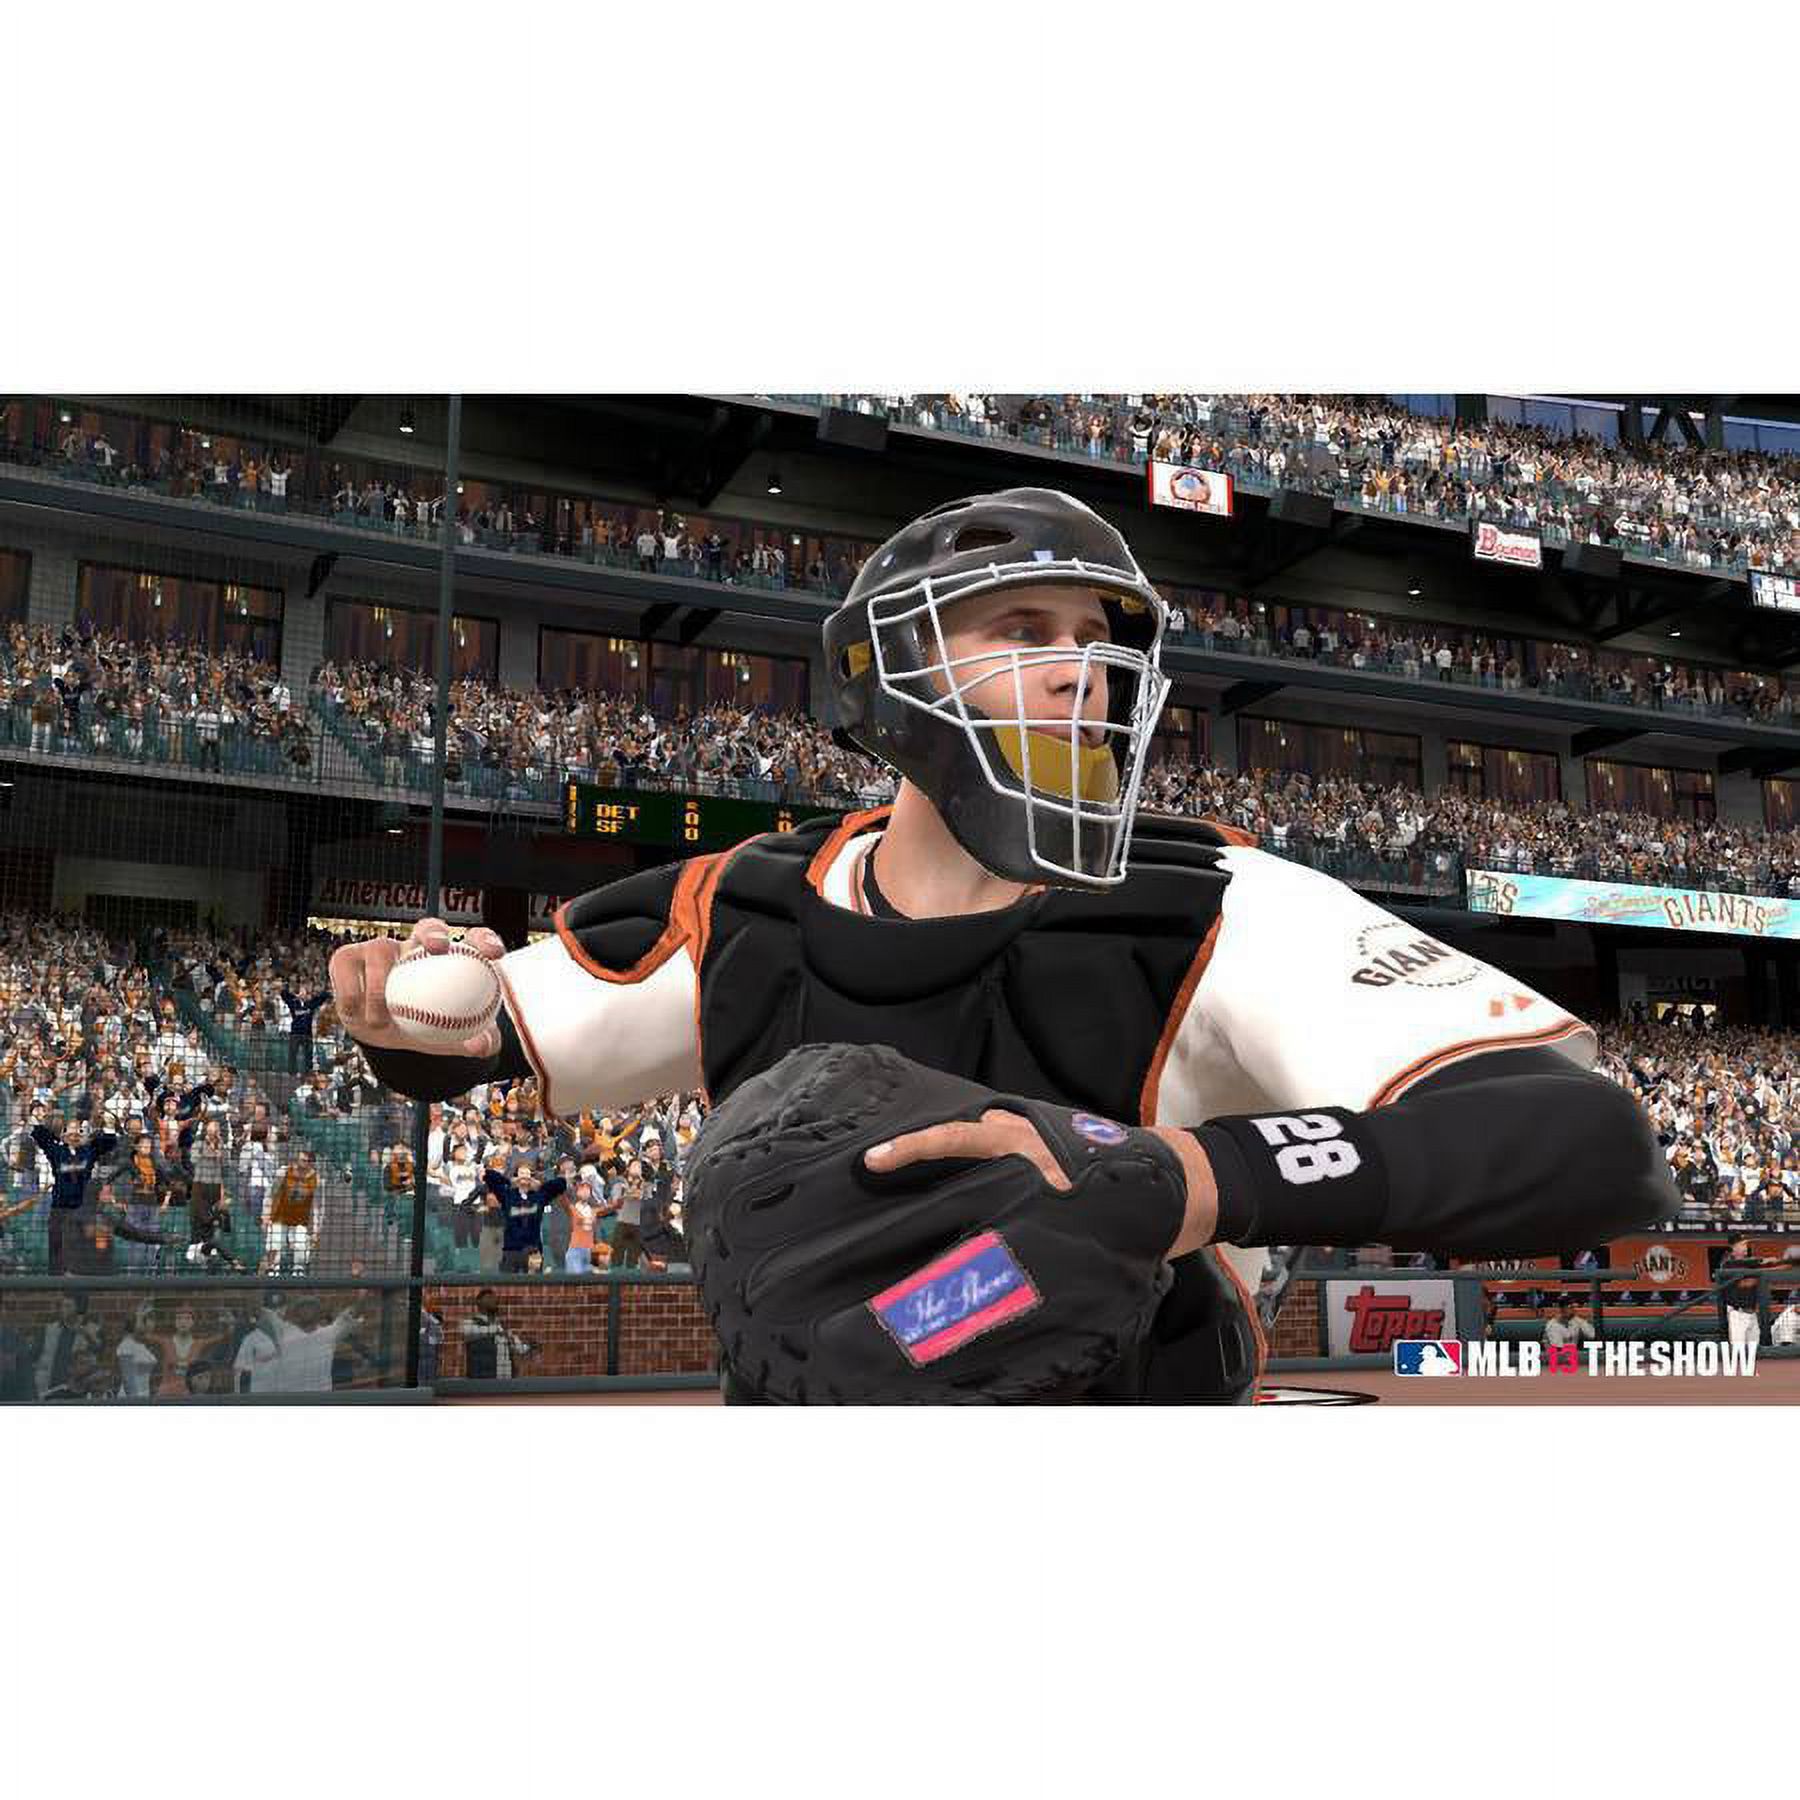 MLB 13 The Show - Playstation 3 - image 3 of 7